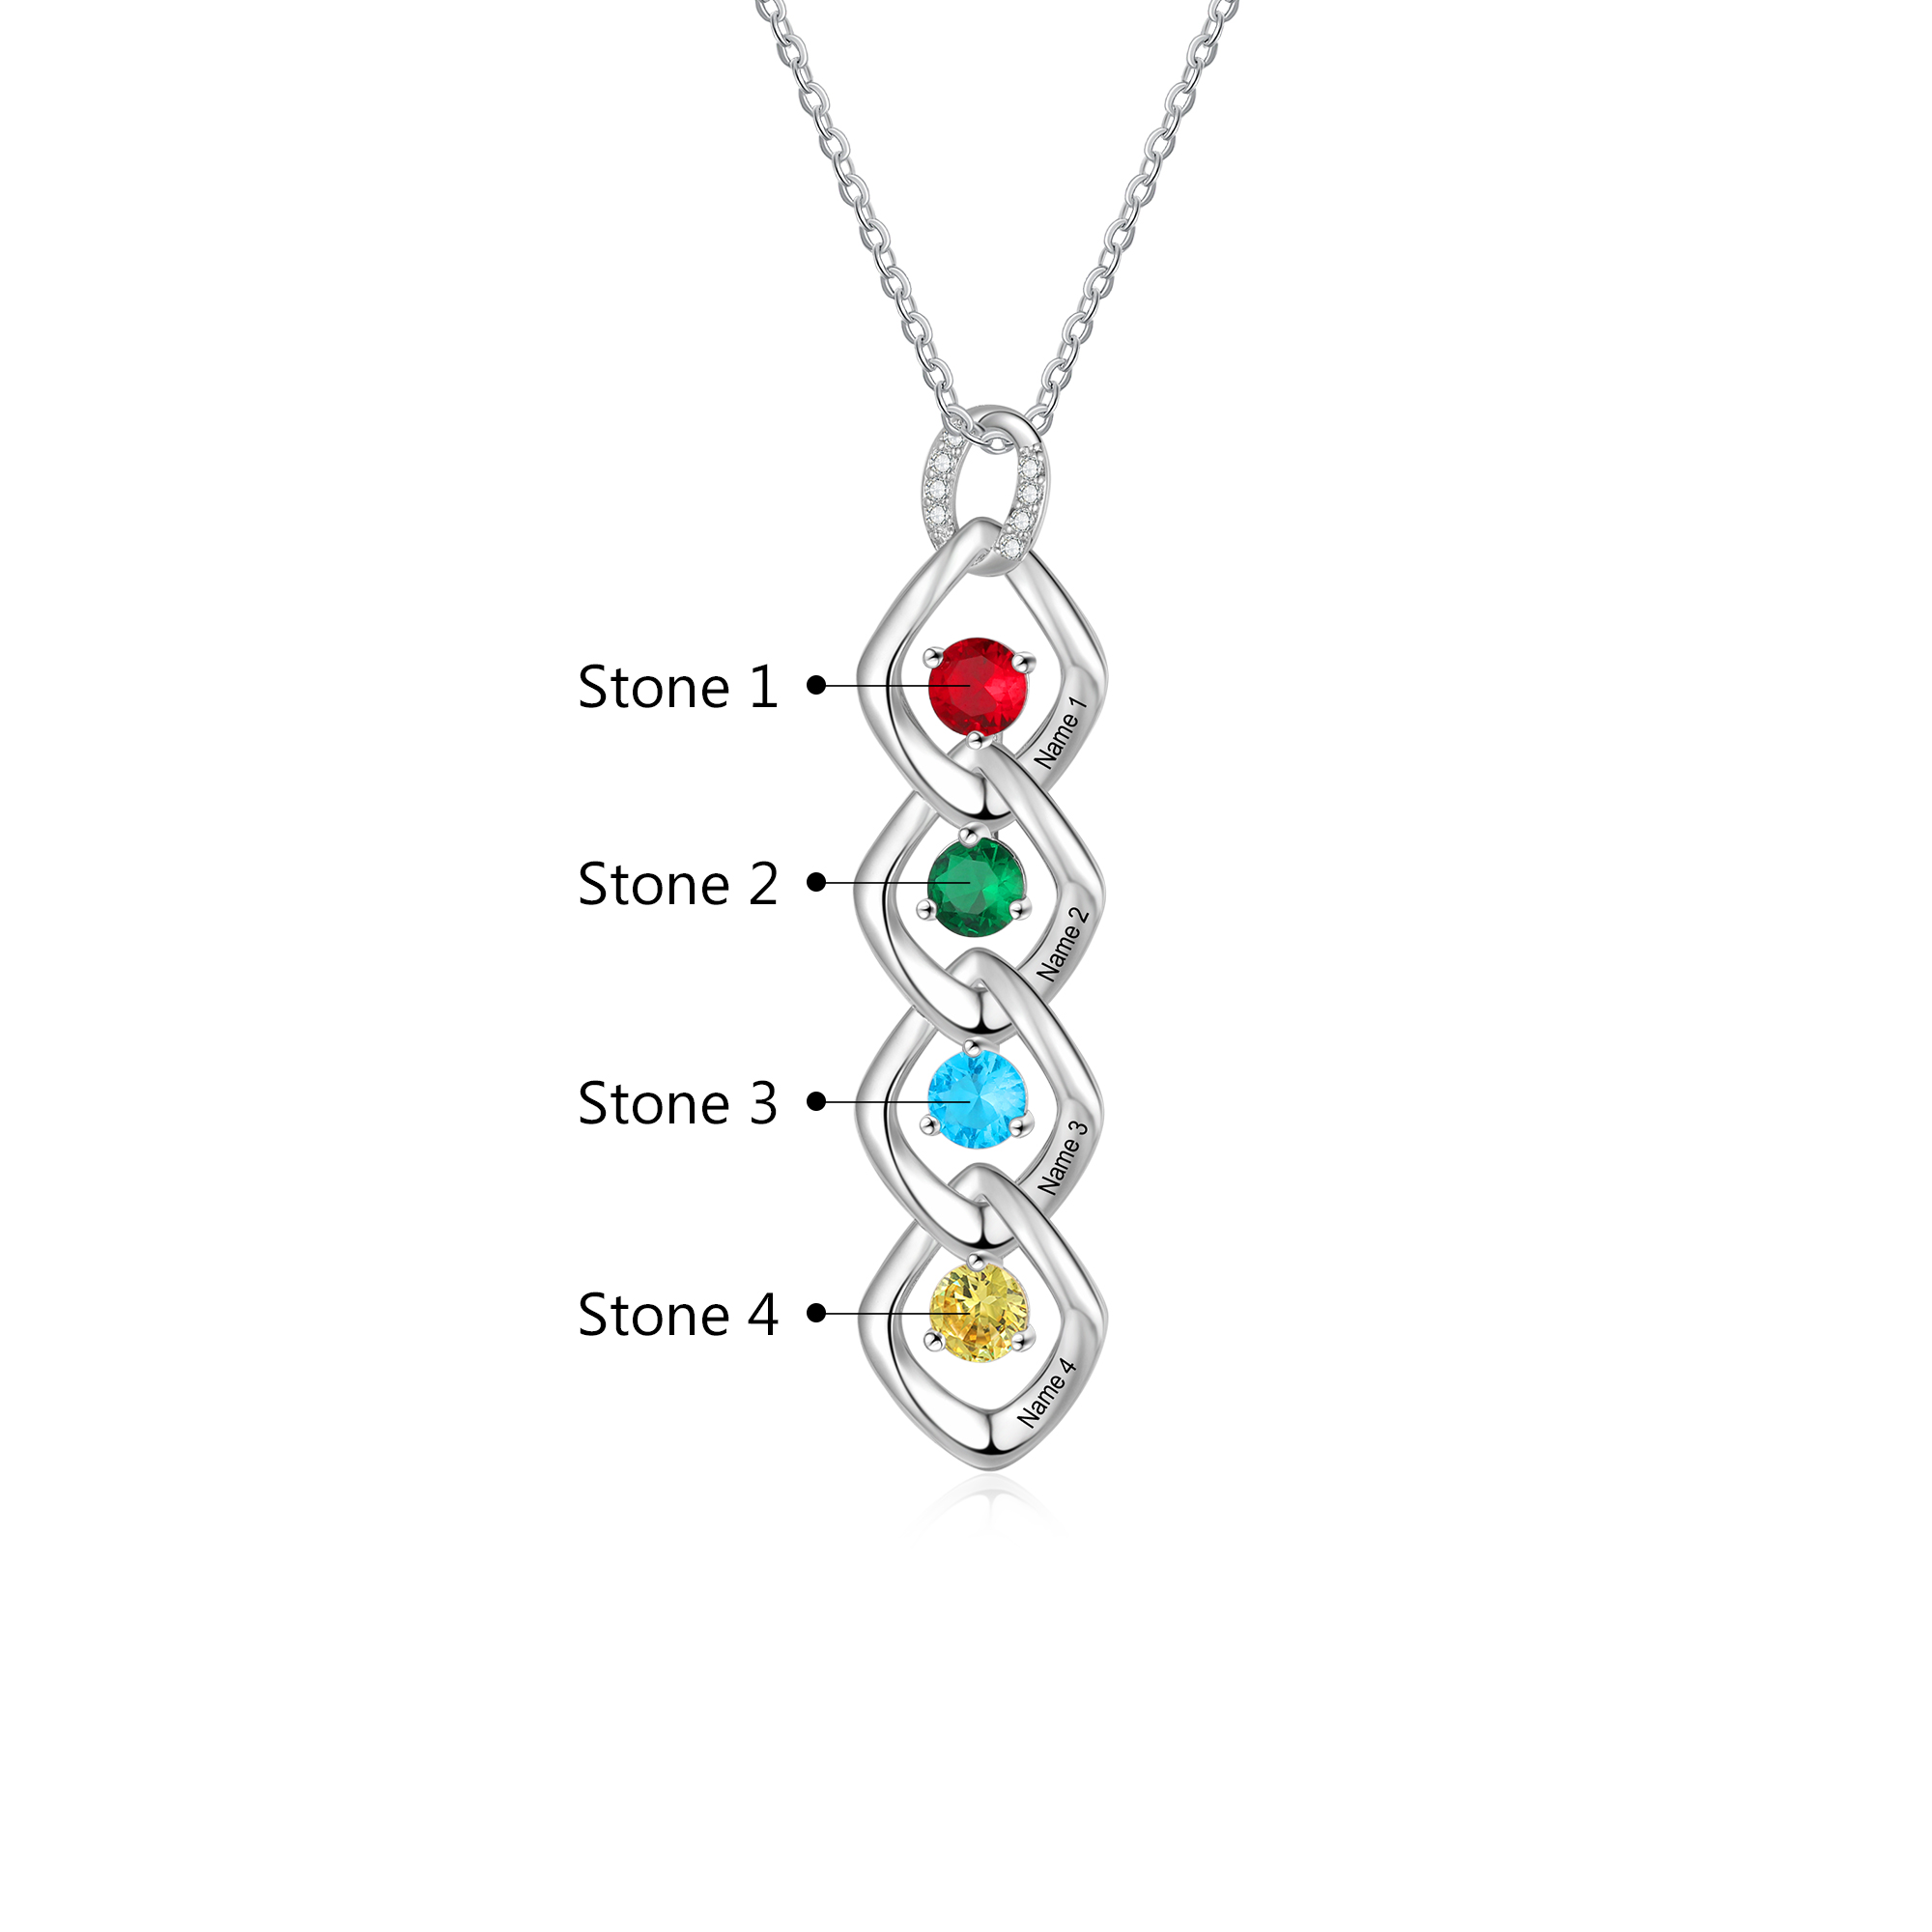 4 Names - Personalized Birthstone Necklace With Name Engraved For A Special Gift For Mom/Grandma